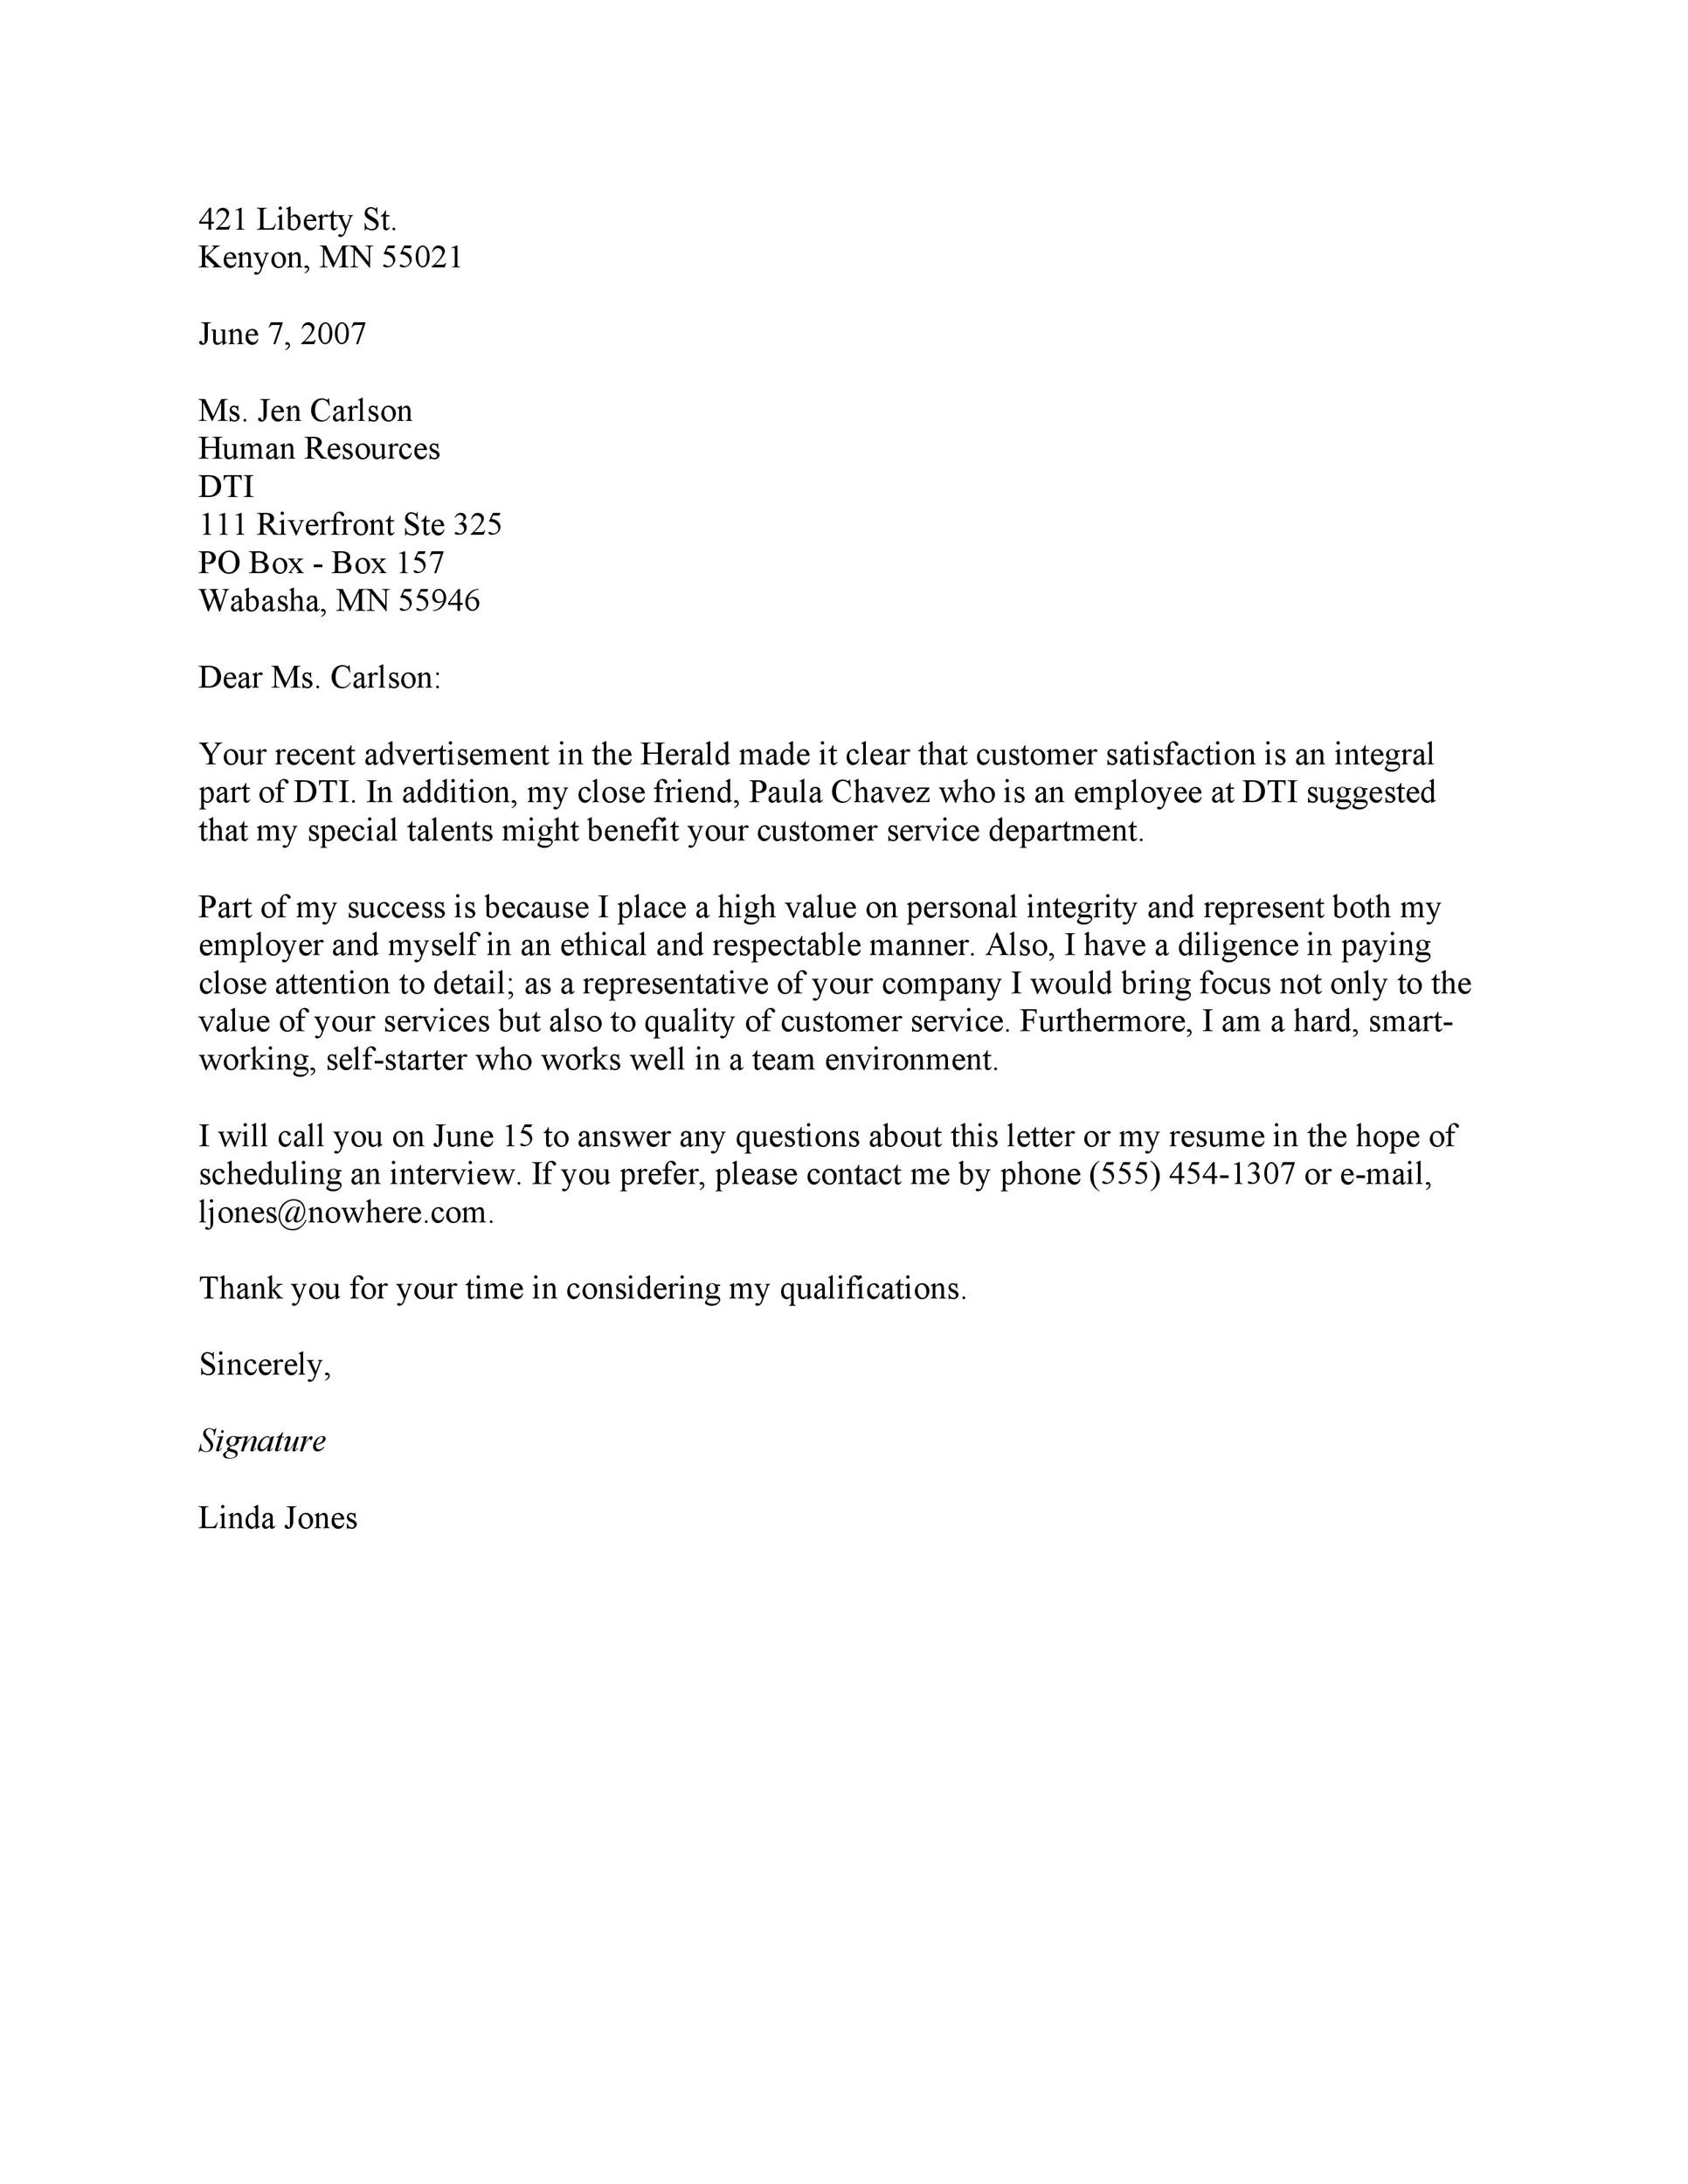 Letter Inquiring About Job from templatelab.com